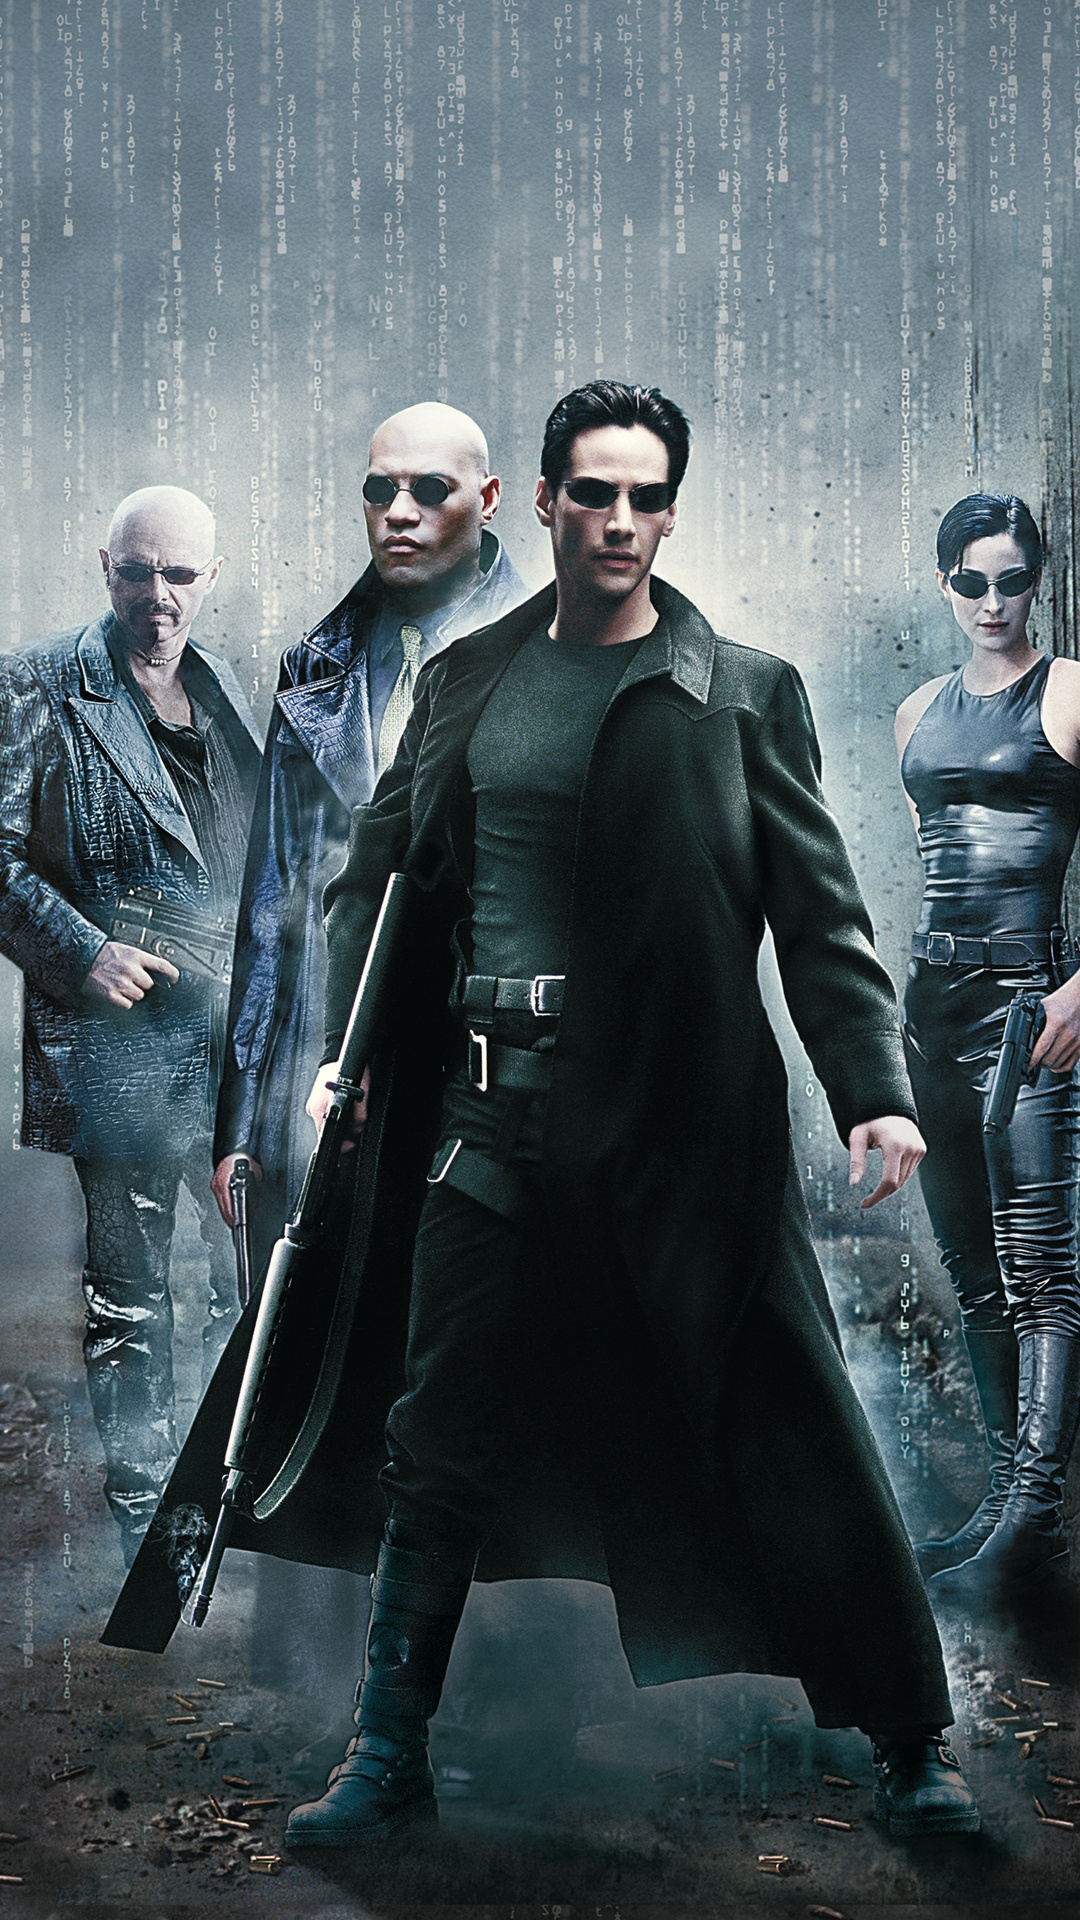 The Matrix: Trilogy, A dystopian future in which humanity is unknowingly trapped inside a simulated reality. 1080x1920 Full HD Background.